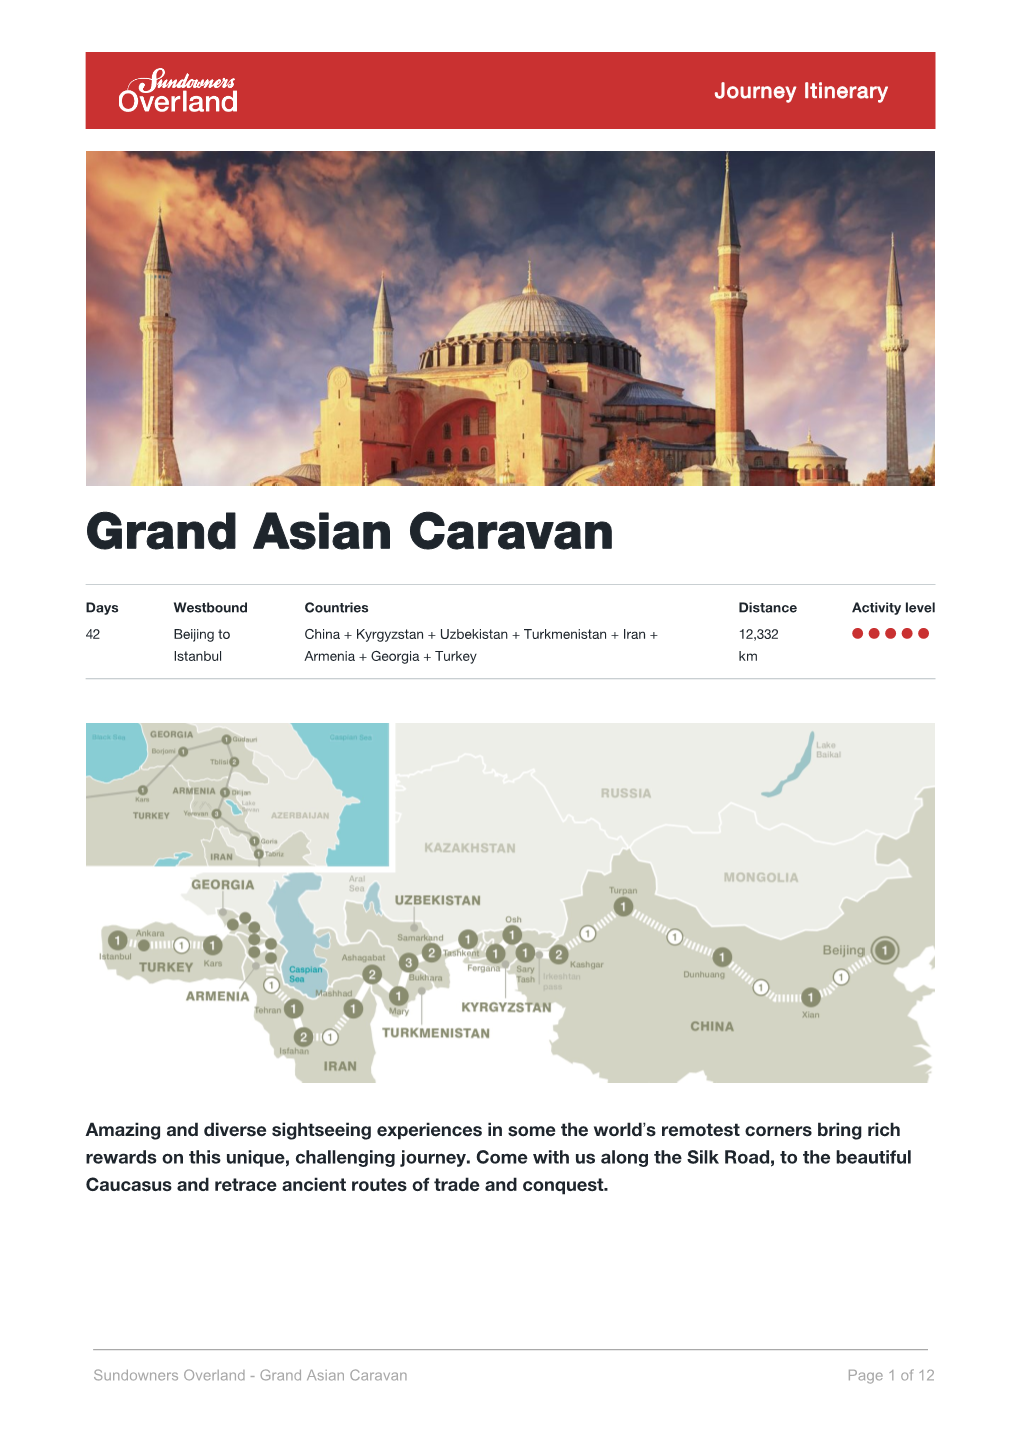 Sundowners Overland - Grand Asian Caravan Page 1 of 12 Itinerary